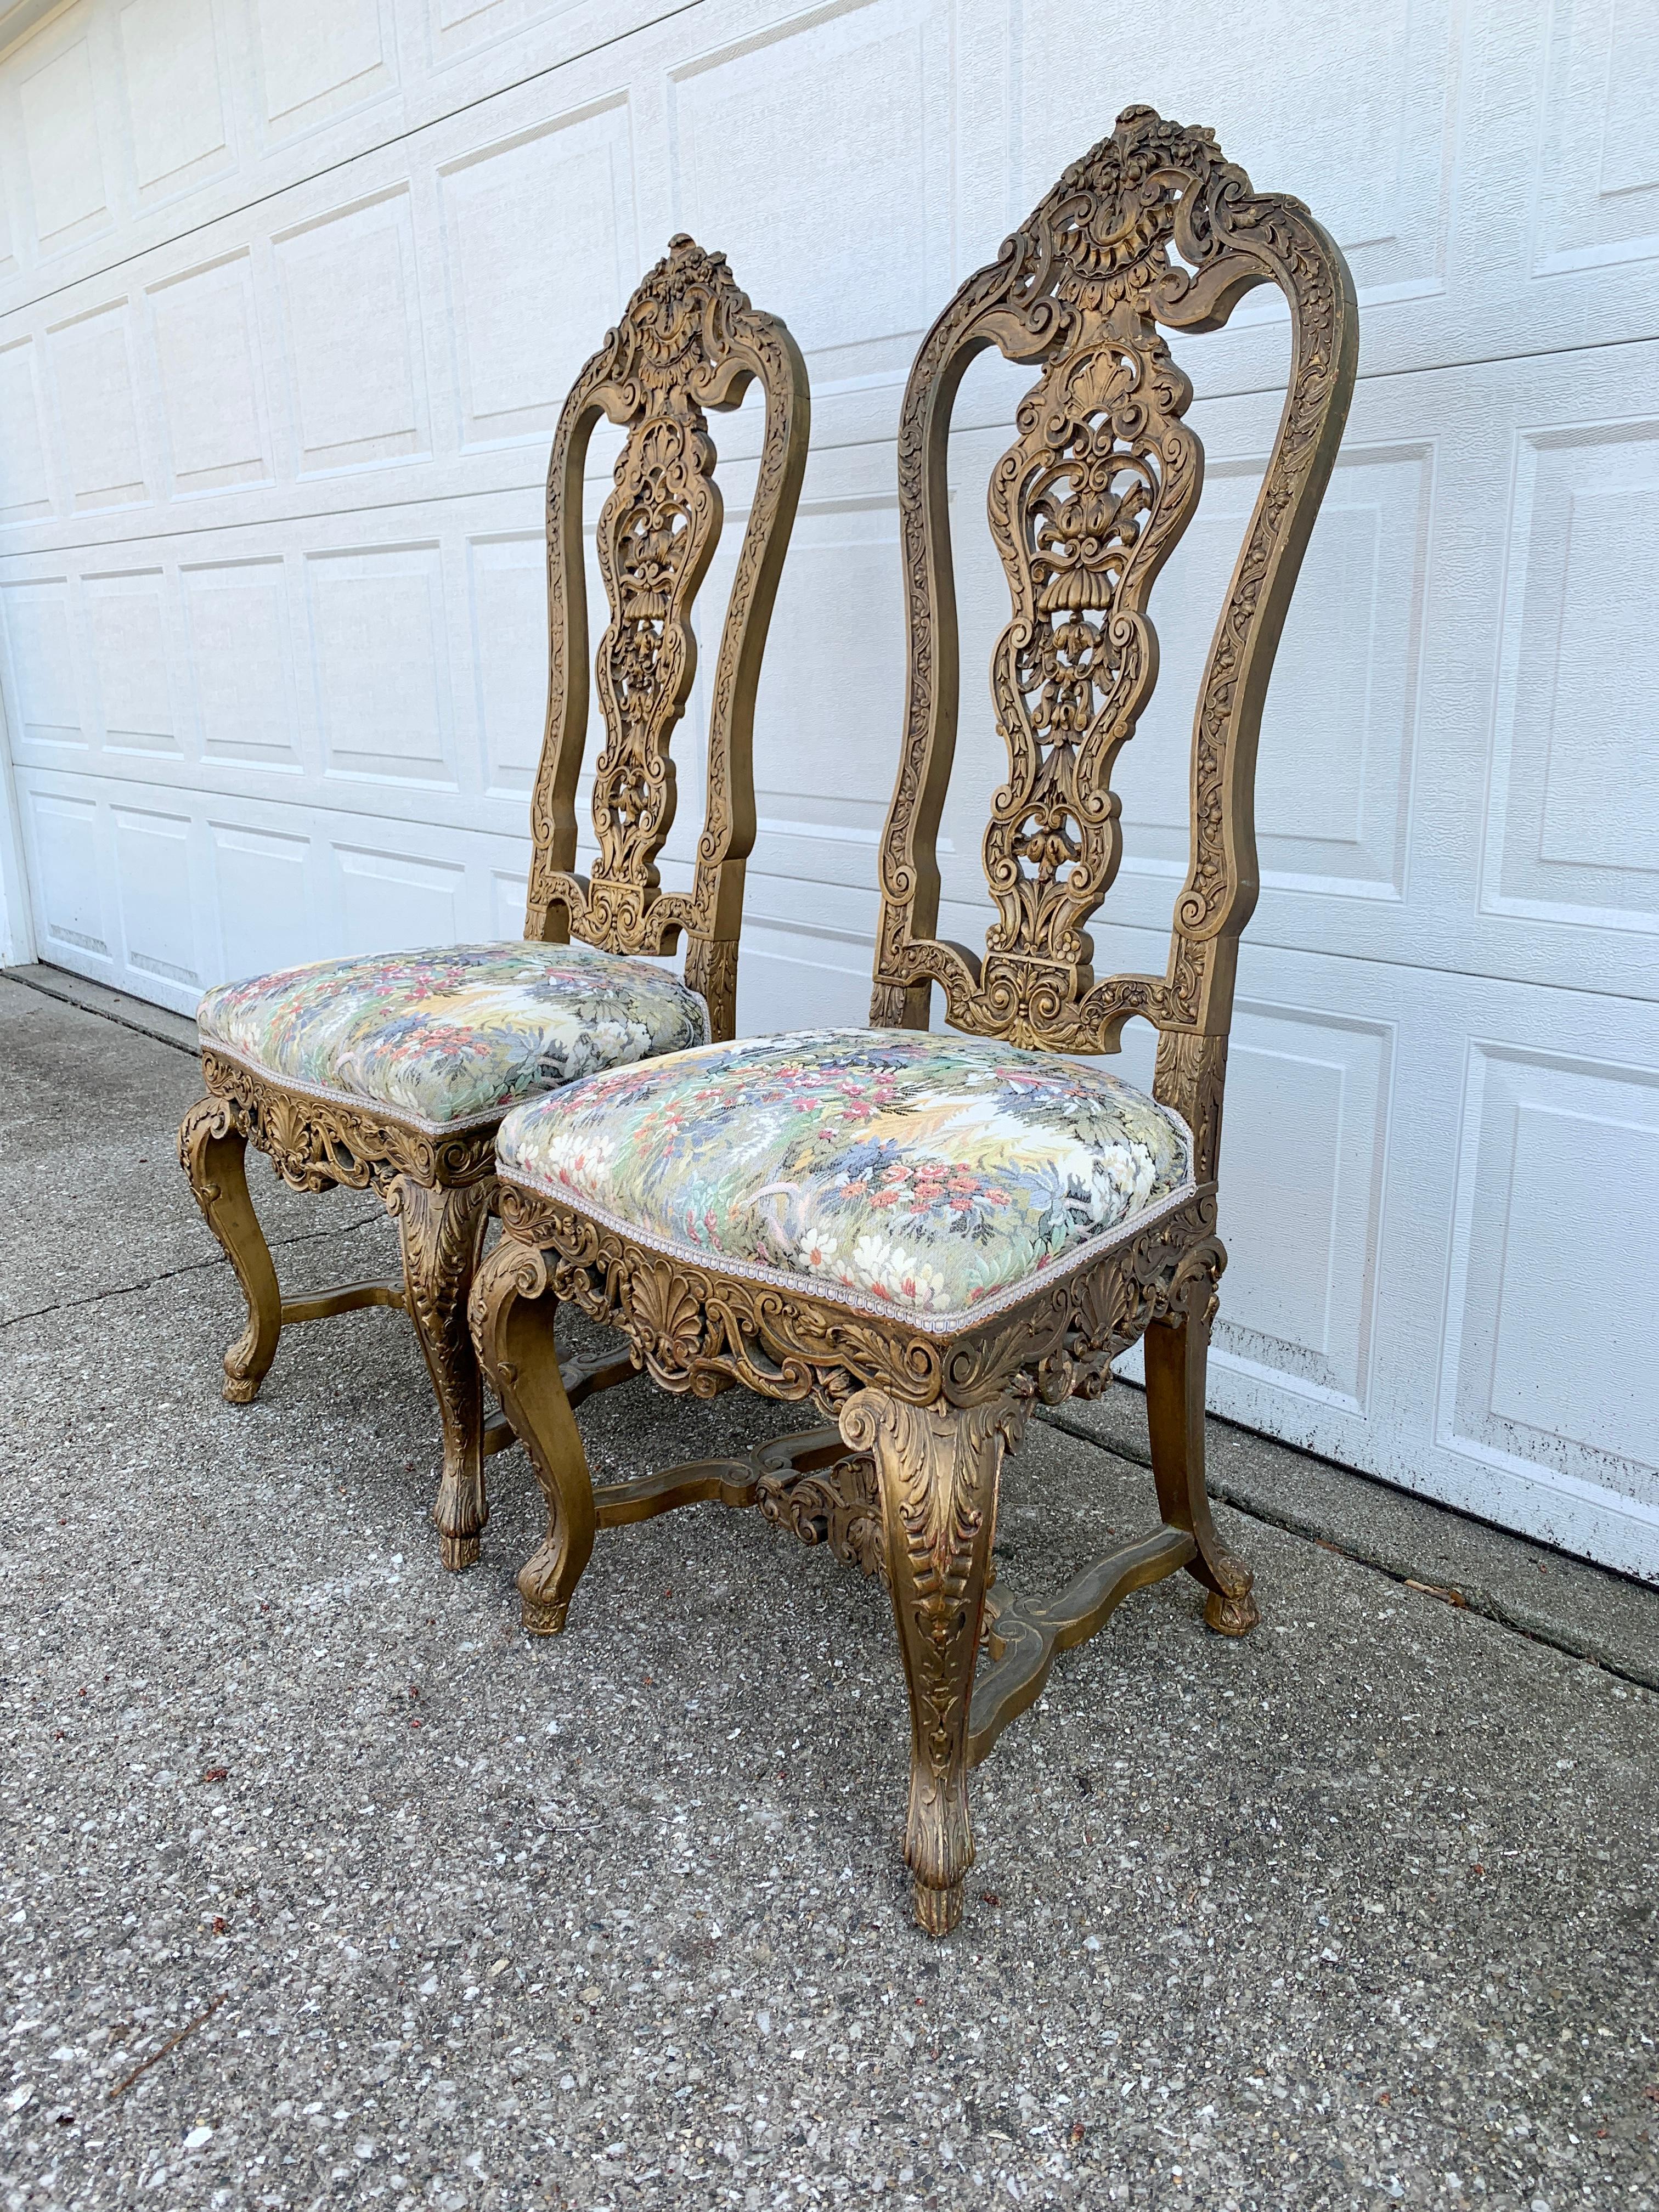 Rococo 19th Century Antique Venetian Carved Gold Giltwood Throne Chairs, Pair For Sale